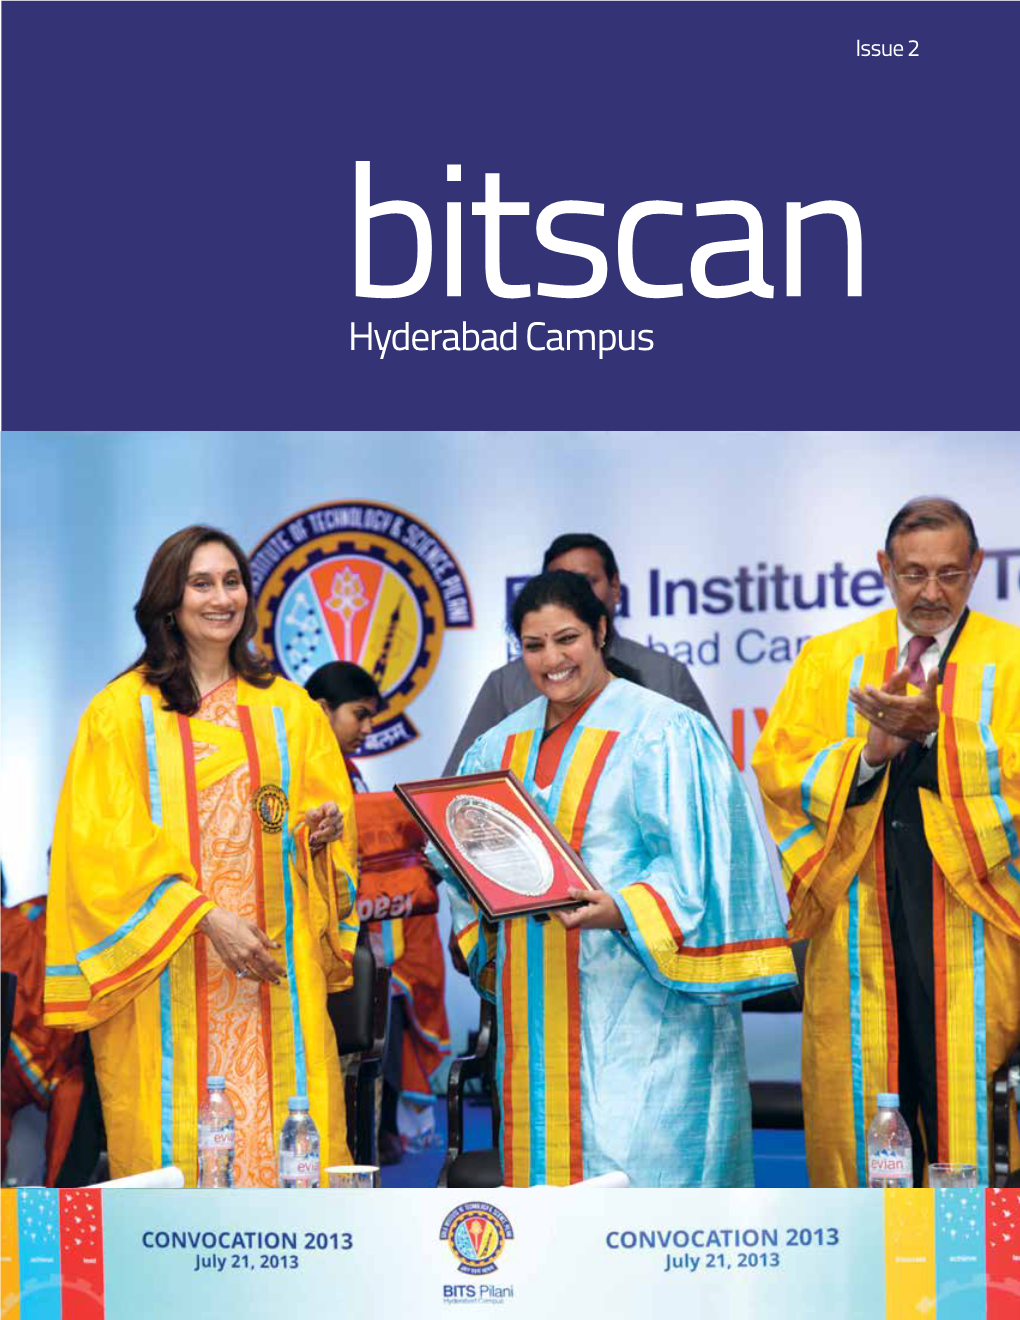 Hyderabad Campus Distinguished Visitors to Our Campus